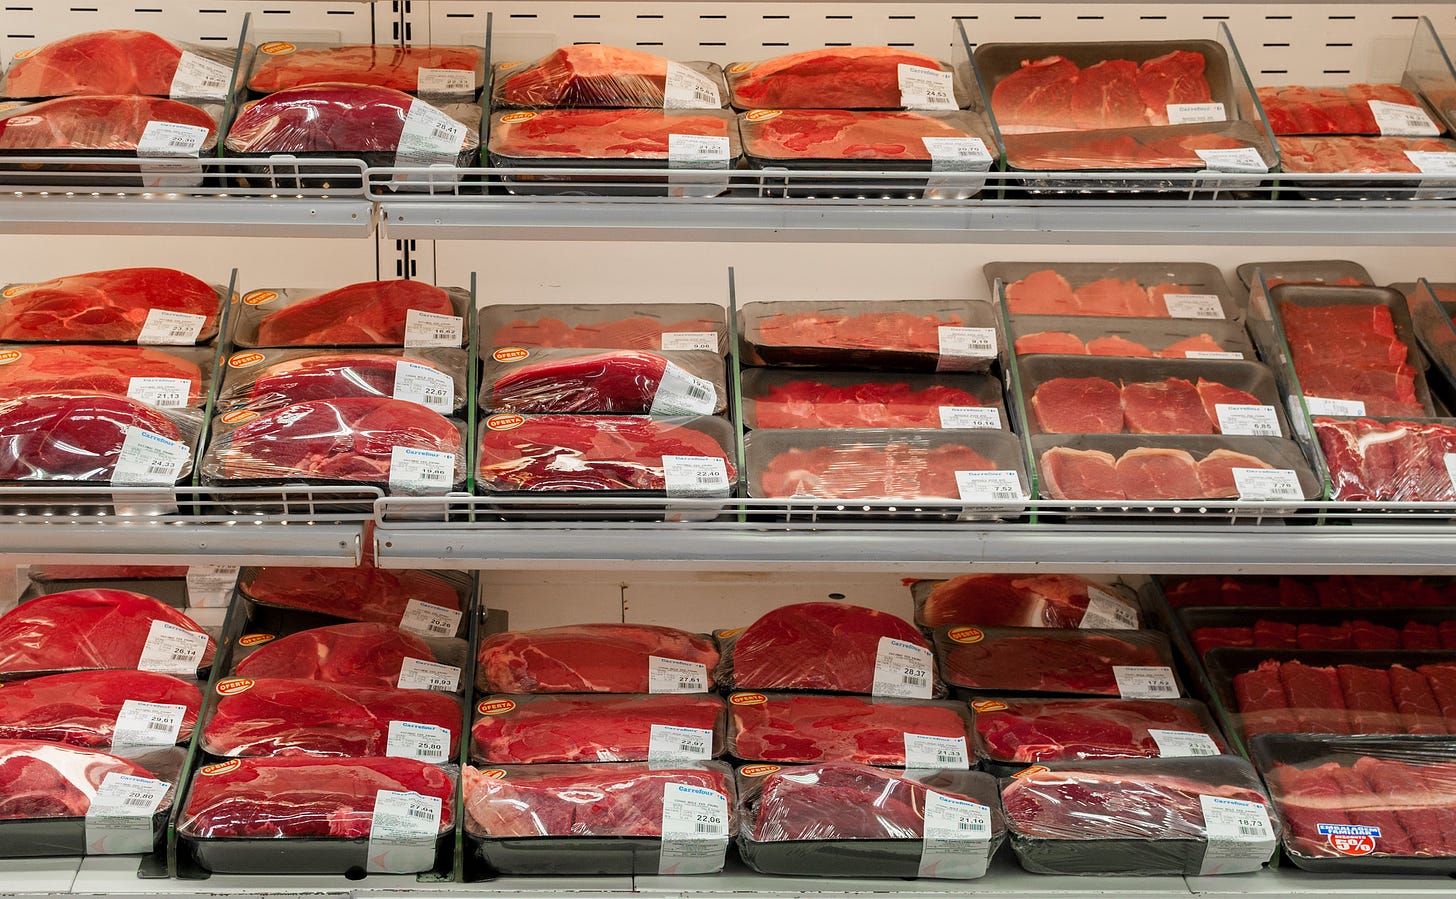 Meat Industry Using ‘Misinformation’ to Block Dietary Change, Report Finds